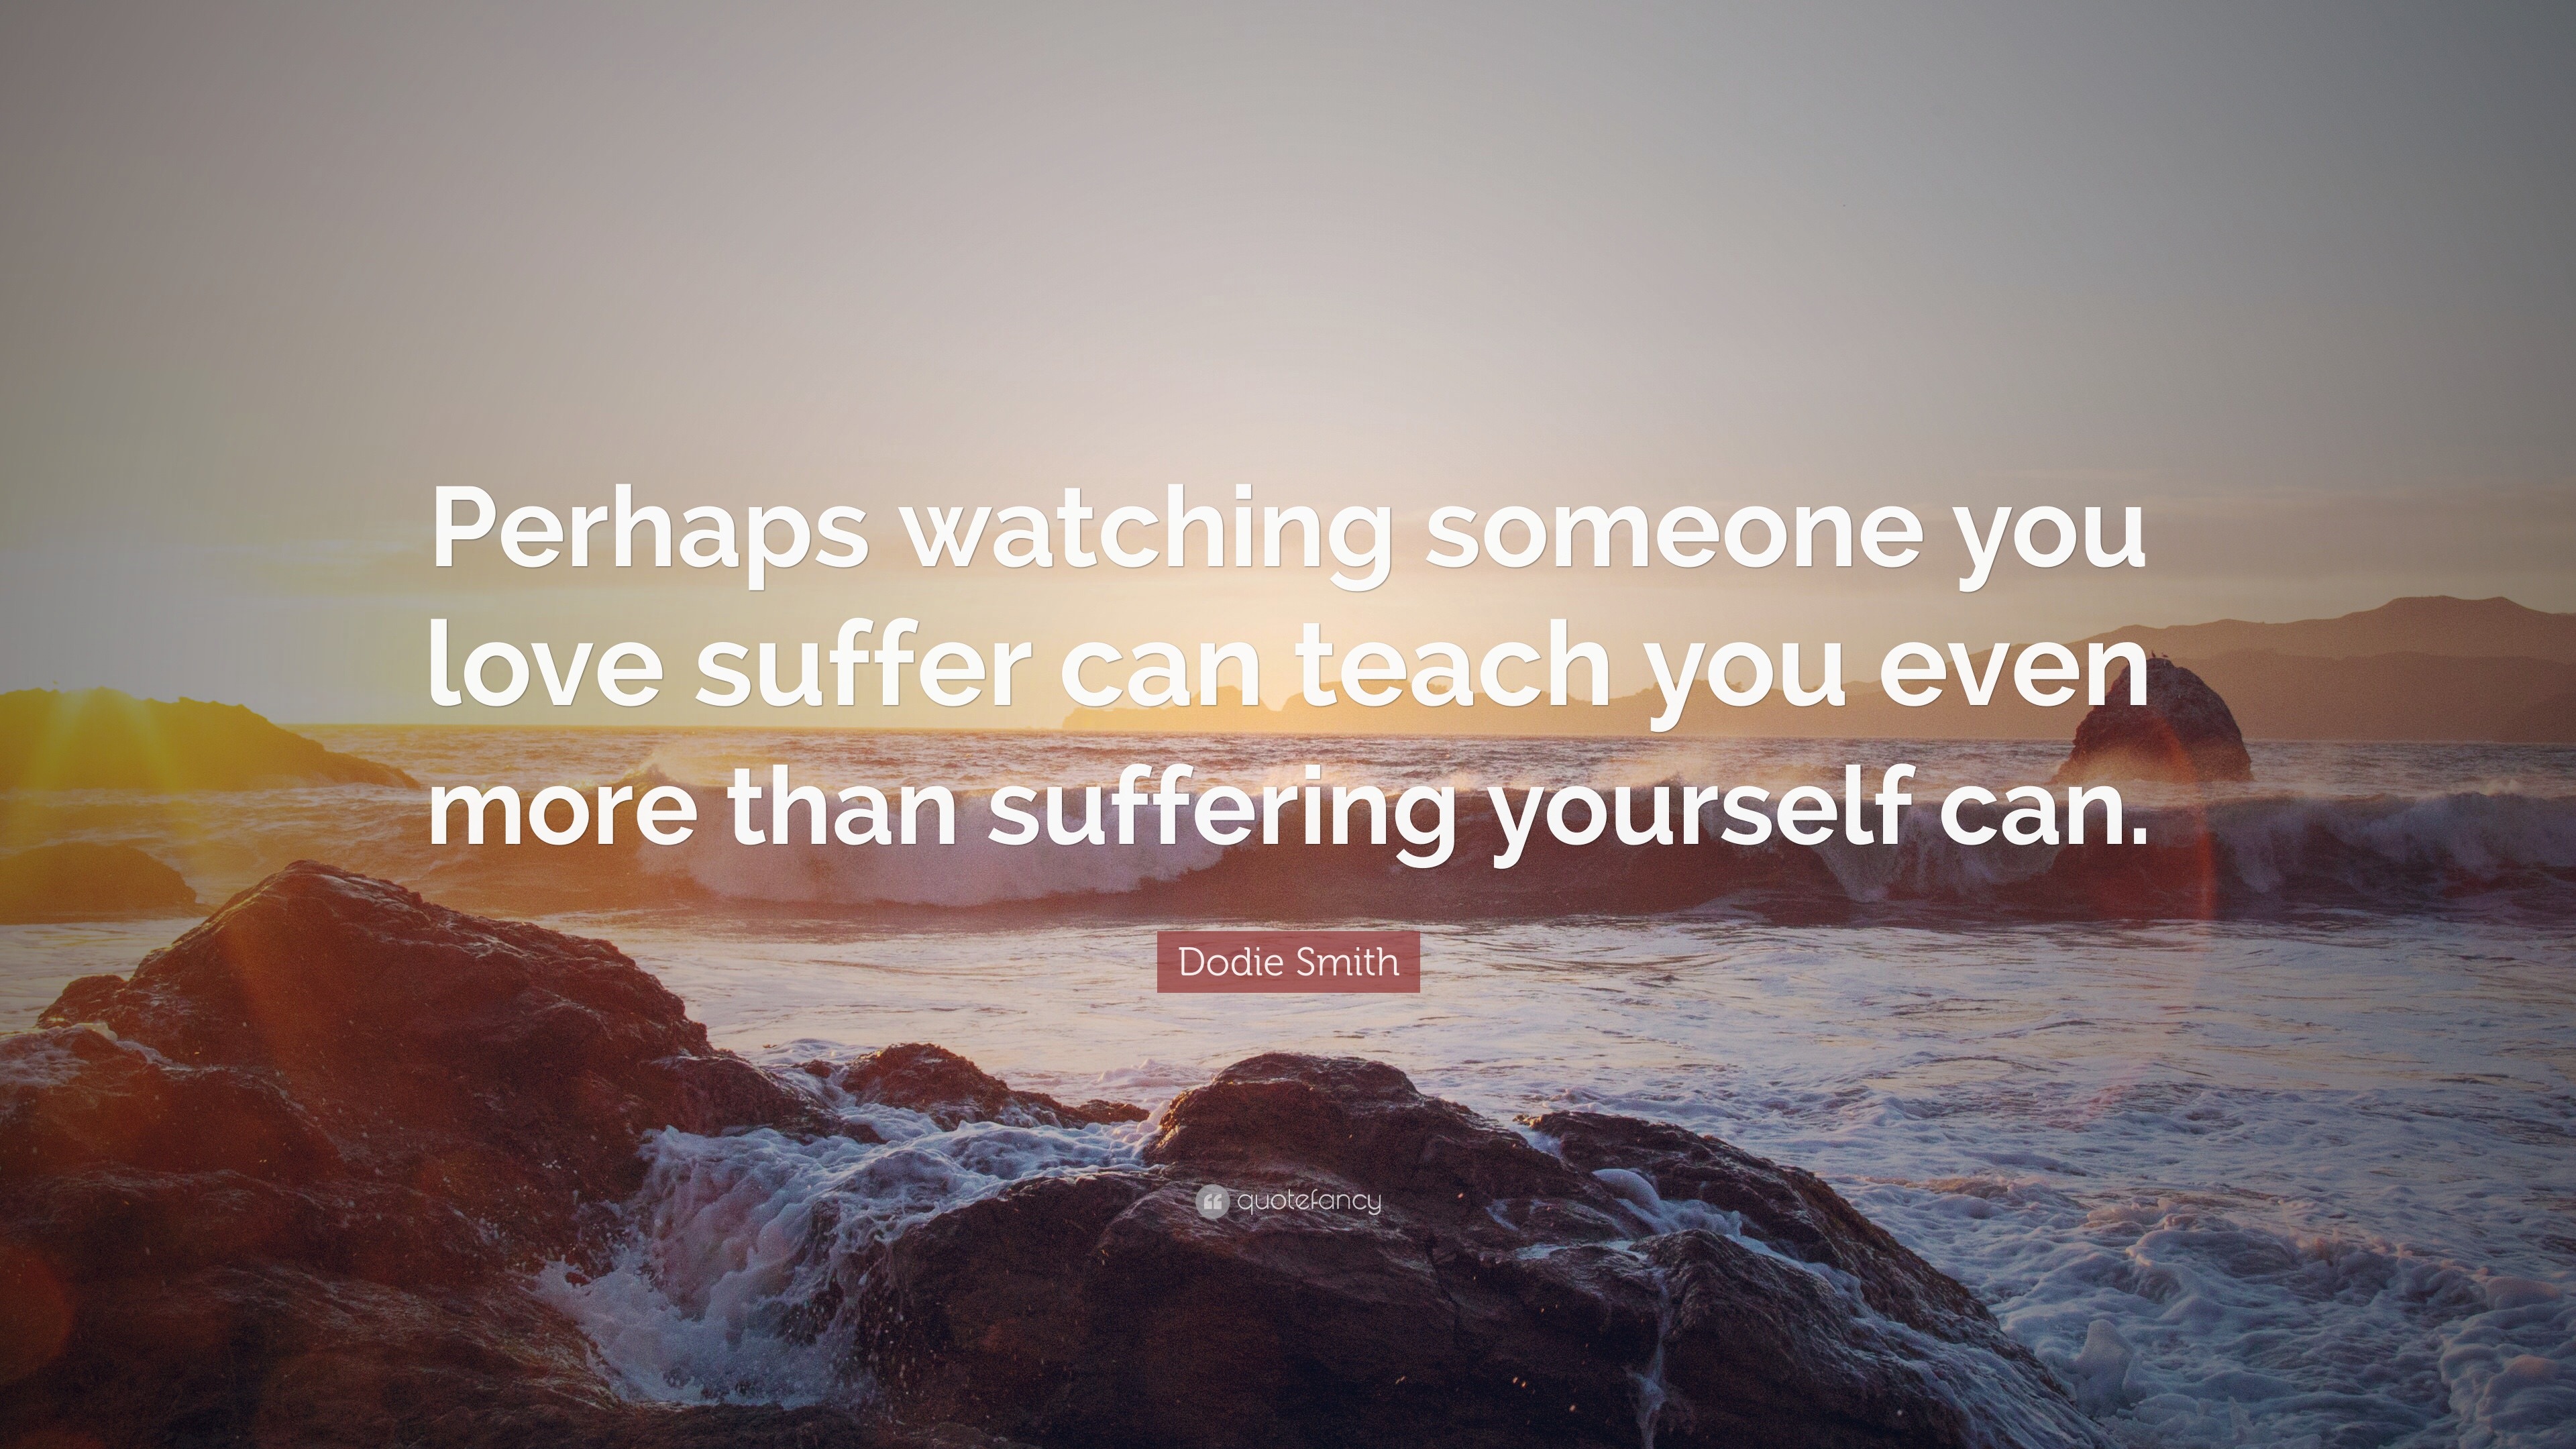 Do Smith Quote “Perhaps watching someone you love suffer can teach you even more